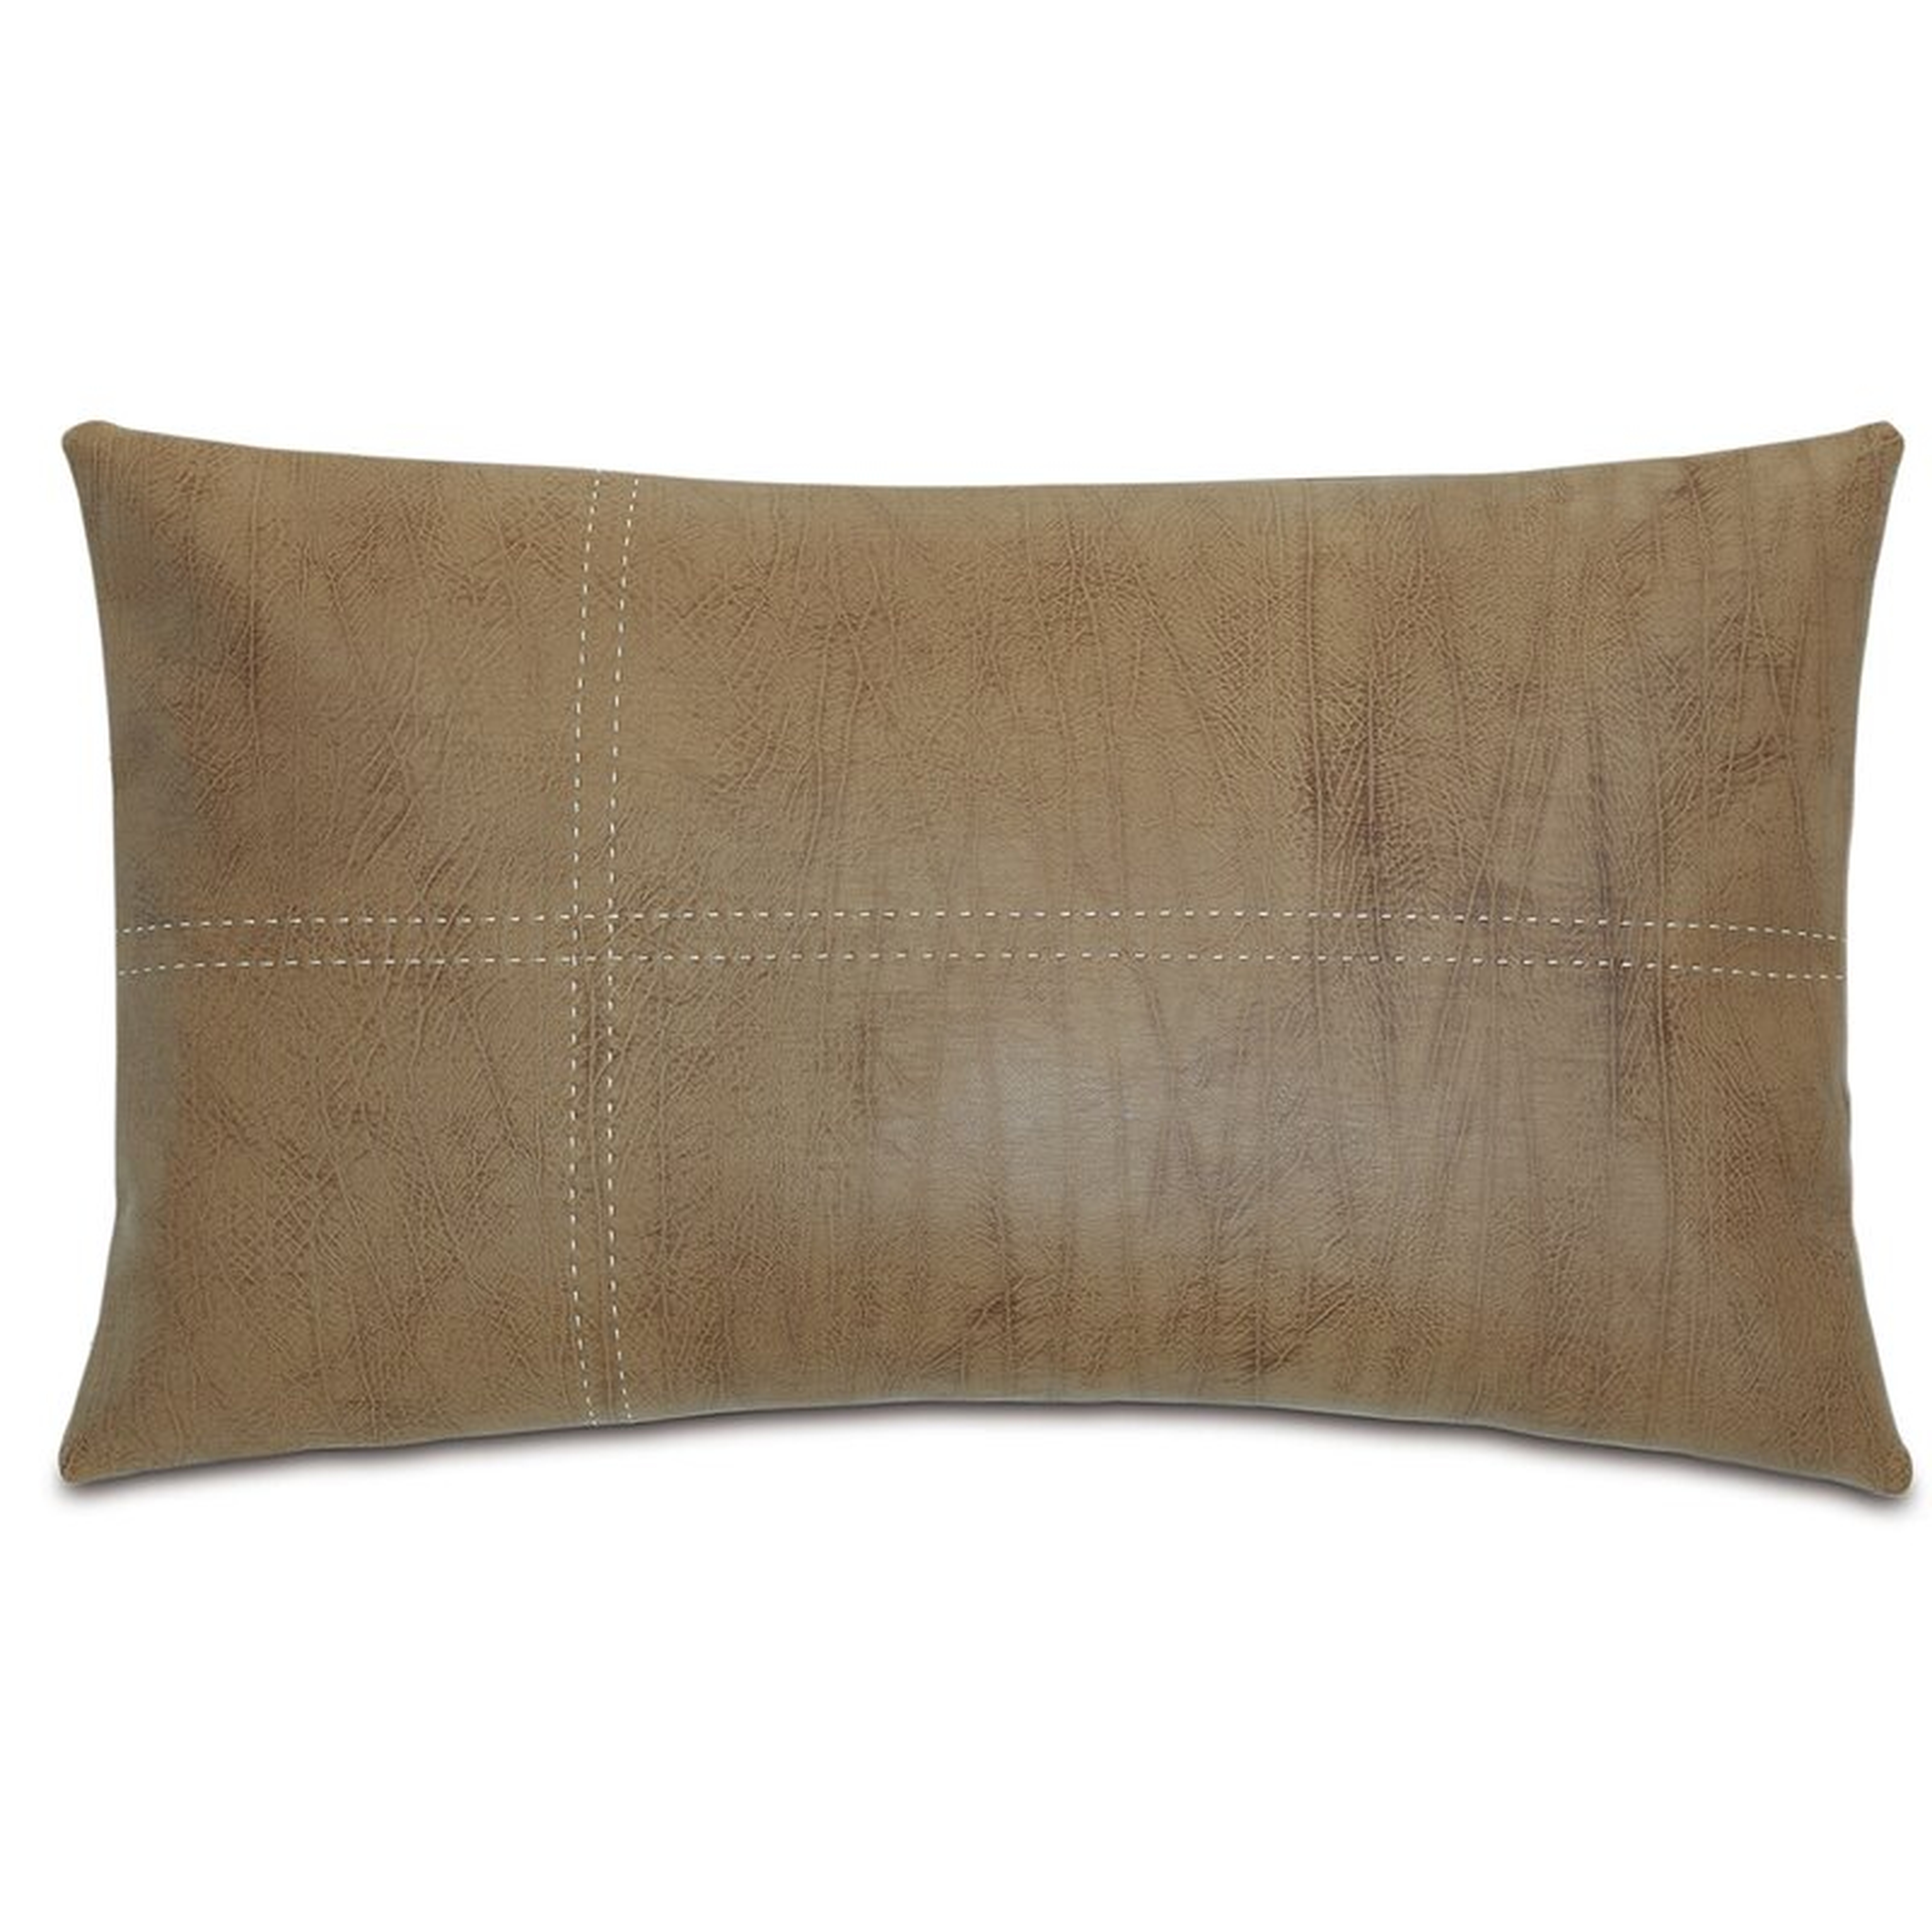 Eastern Accents Edward Faux Leather Lumbar Pillow Cover & Insert - Perigold